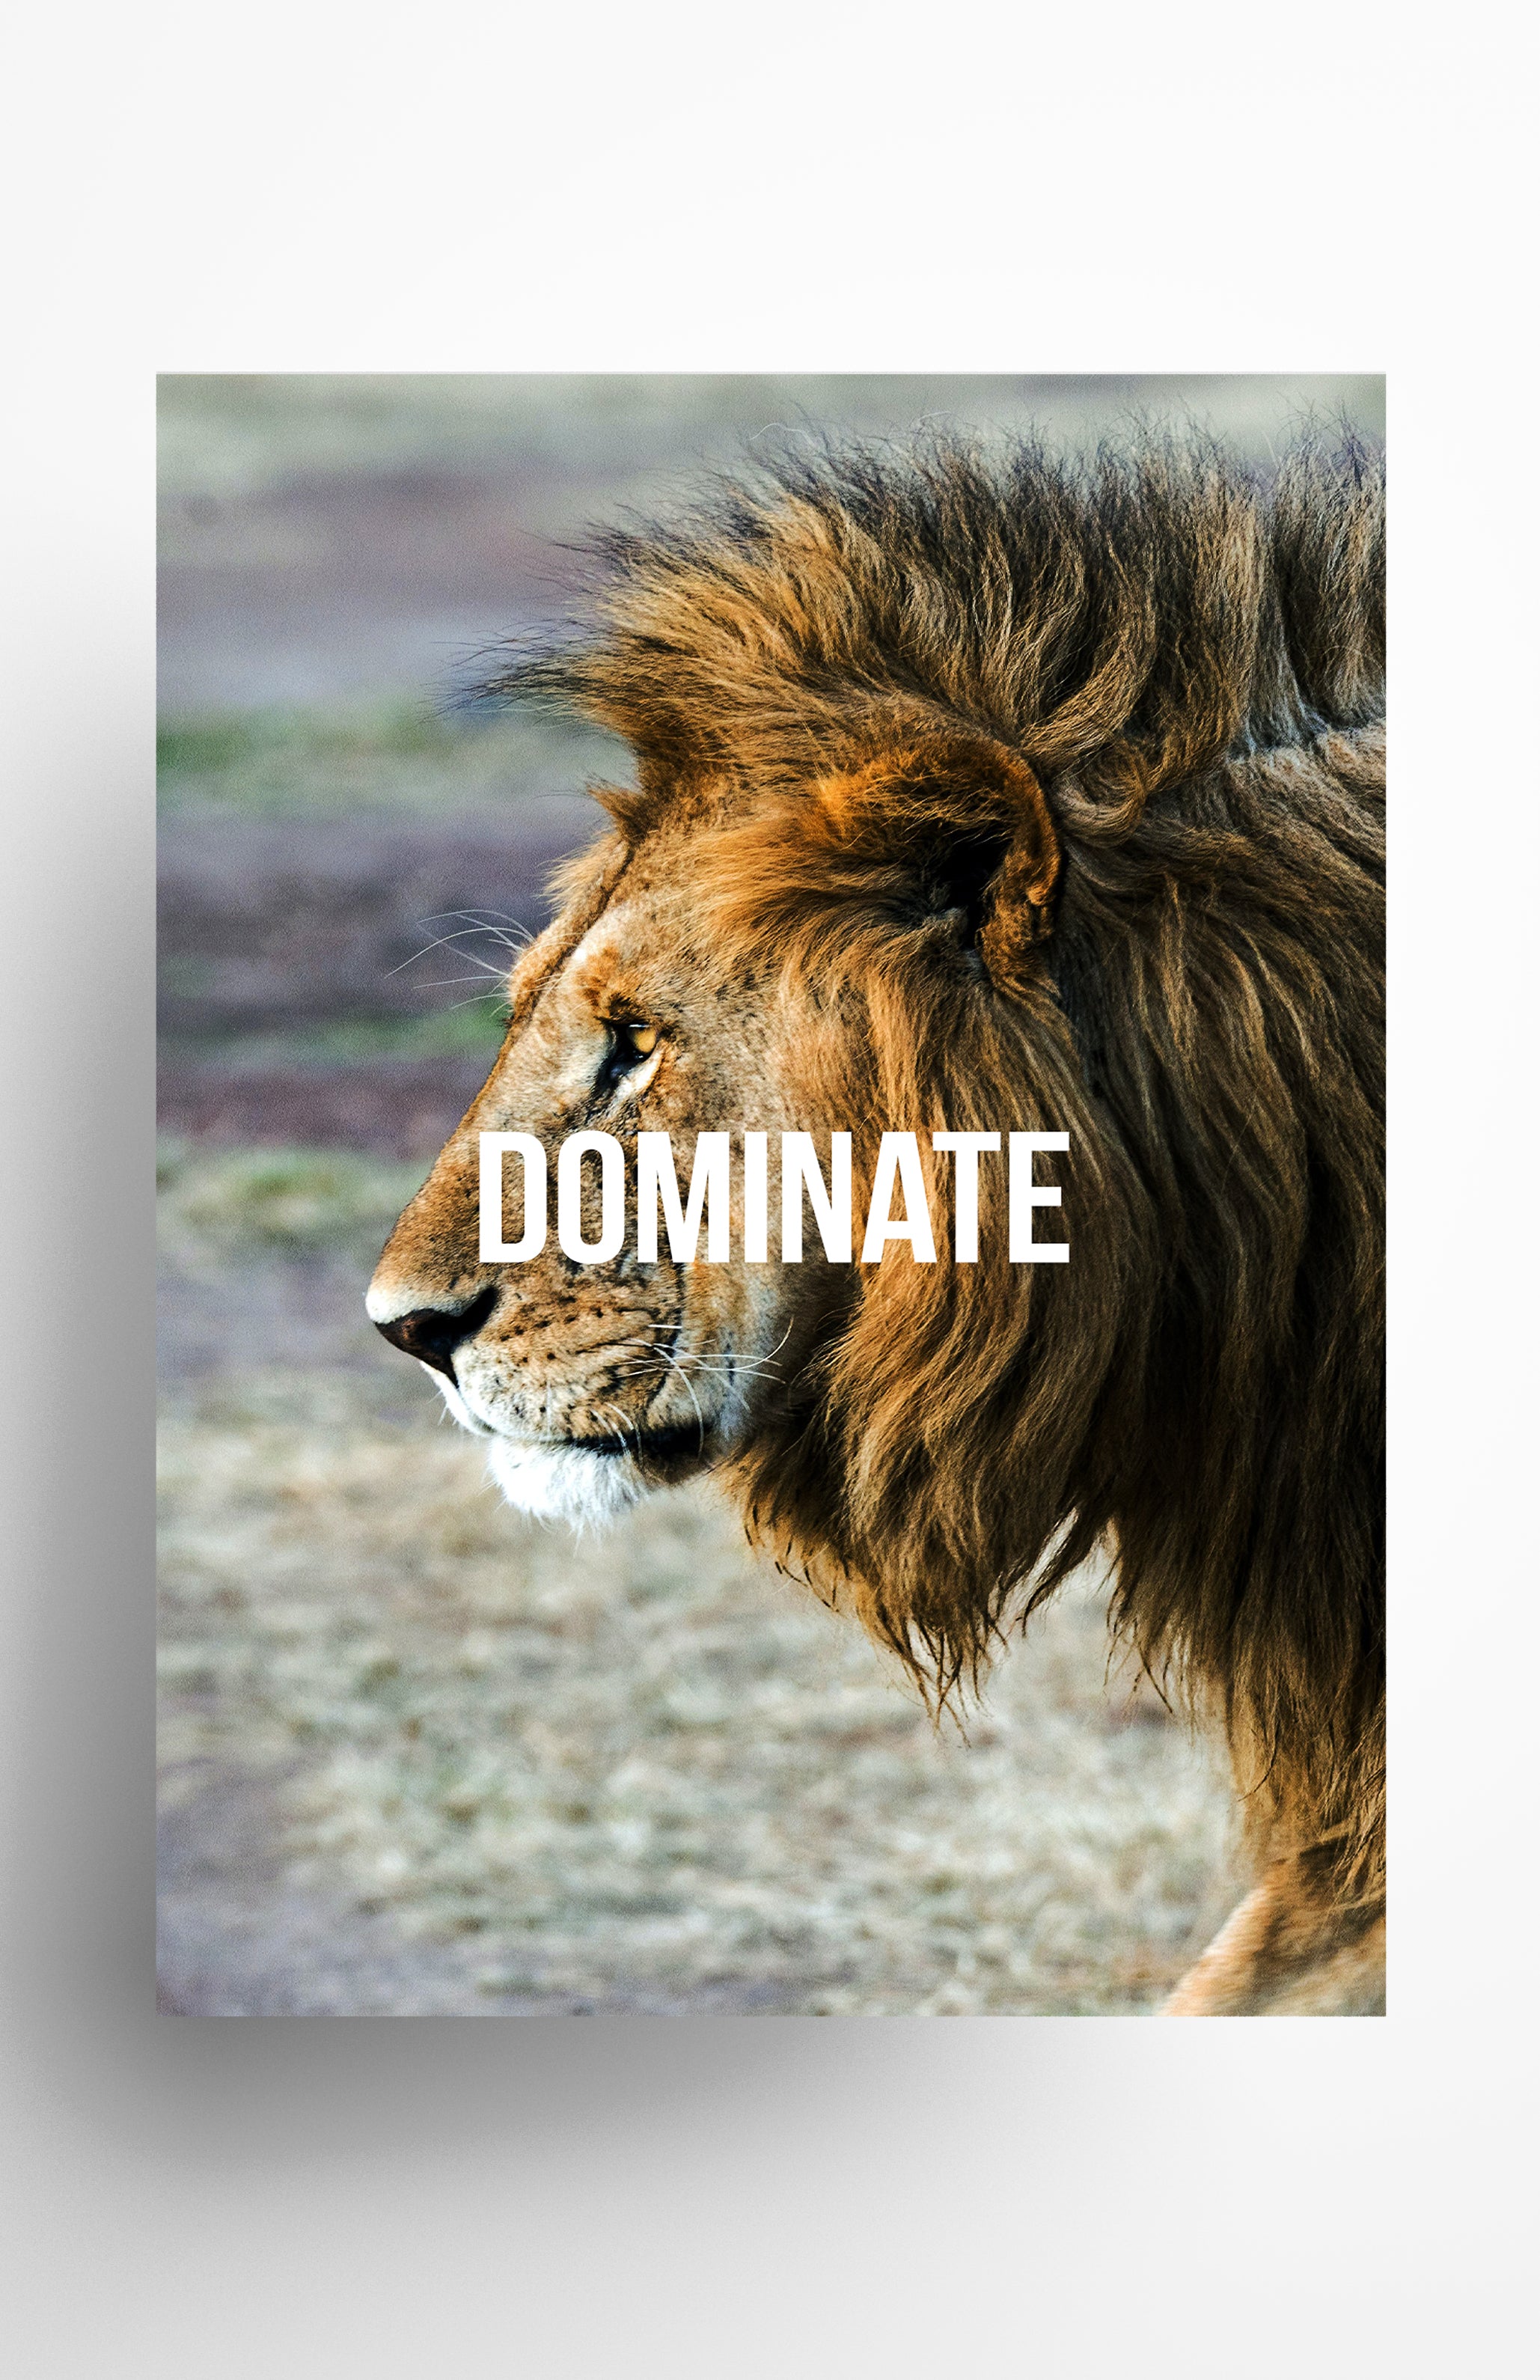 V3 Apparel womens Dominate, Motivational posters, mens inspirational wall artwork and empowering poster quote designs for office, home gym, school, kitchen and living room.